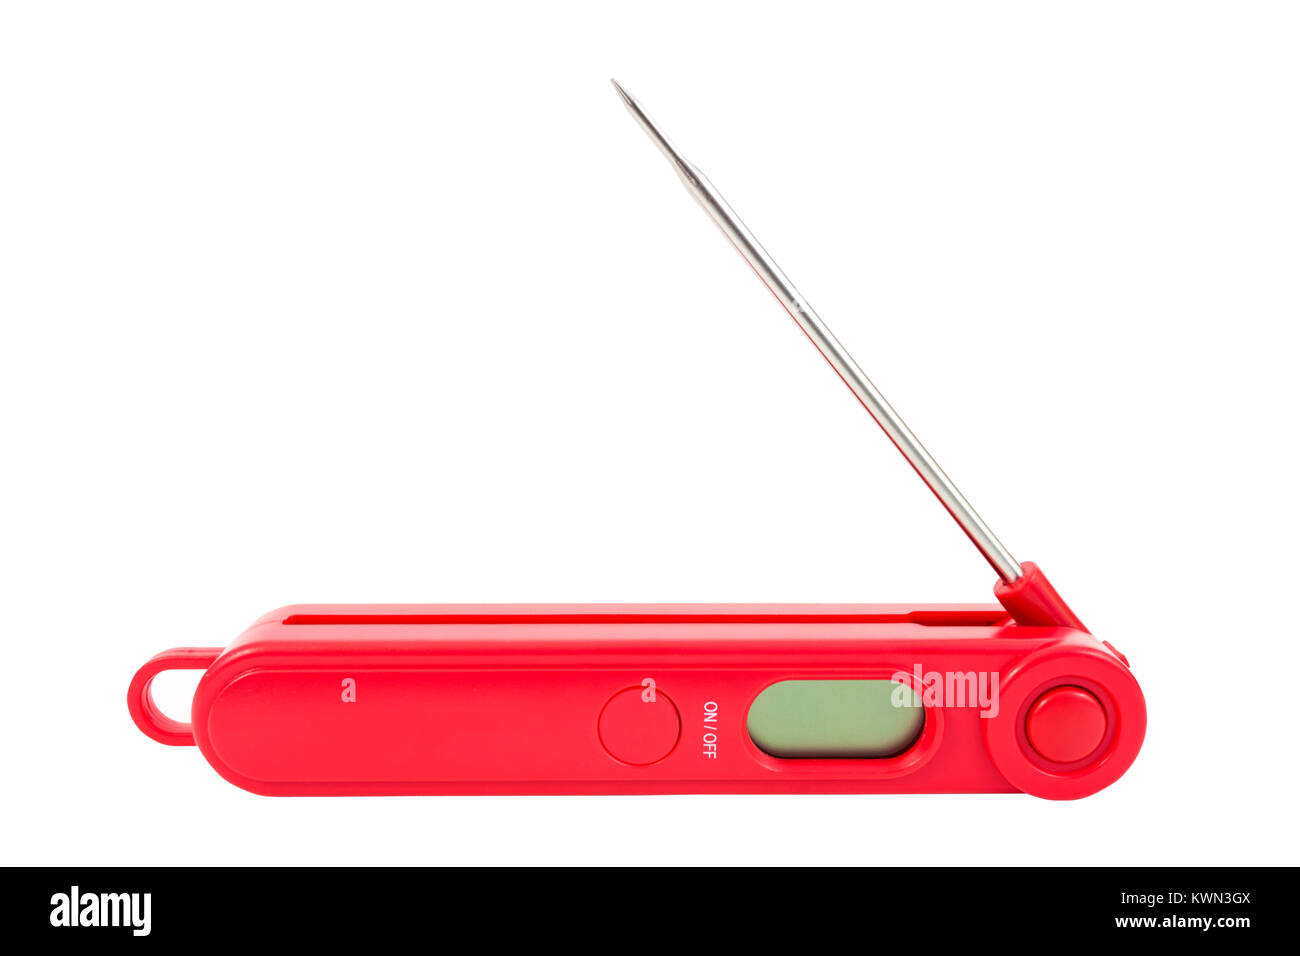 https://c8.alamy.com/comp/KWN3GX/red-digital-meat-thermometer-isolated-KWN3GX.jpg